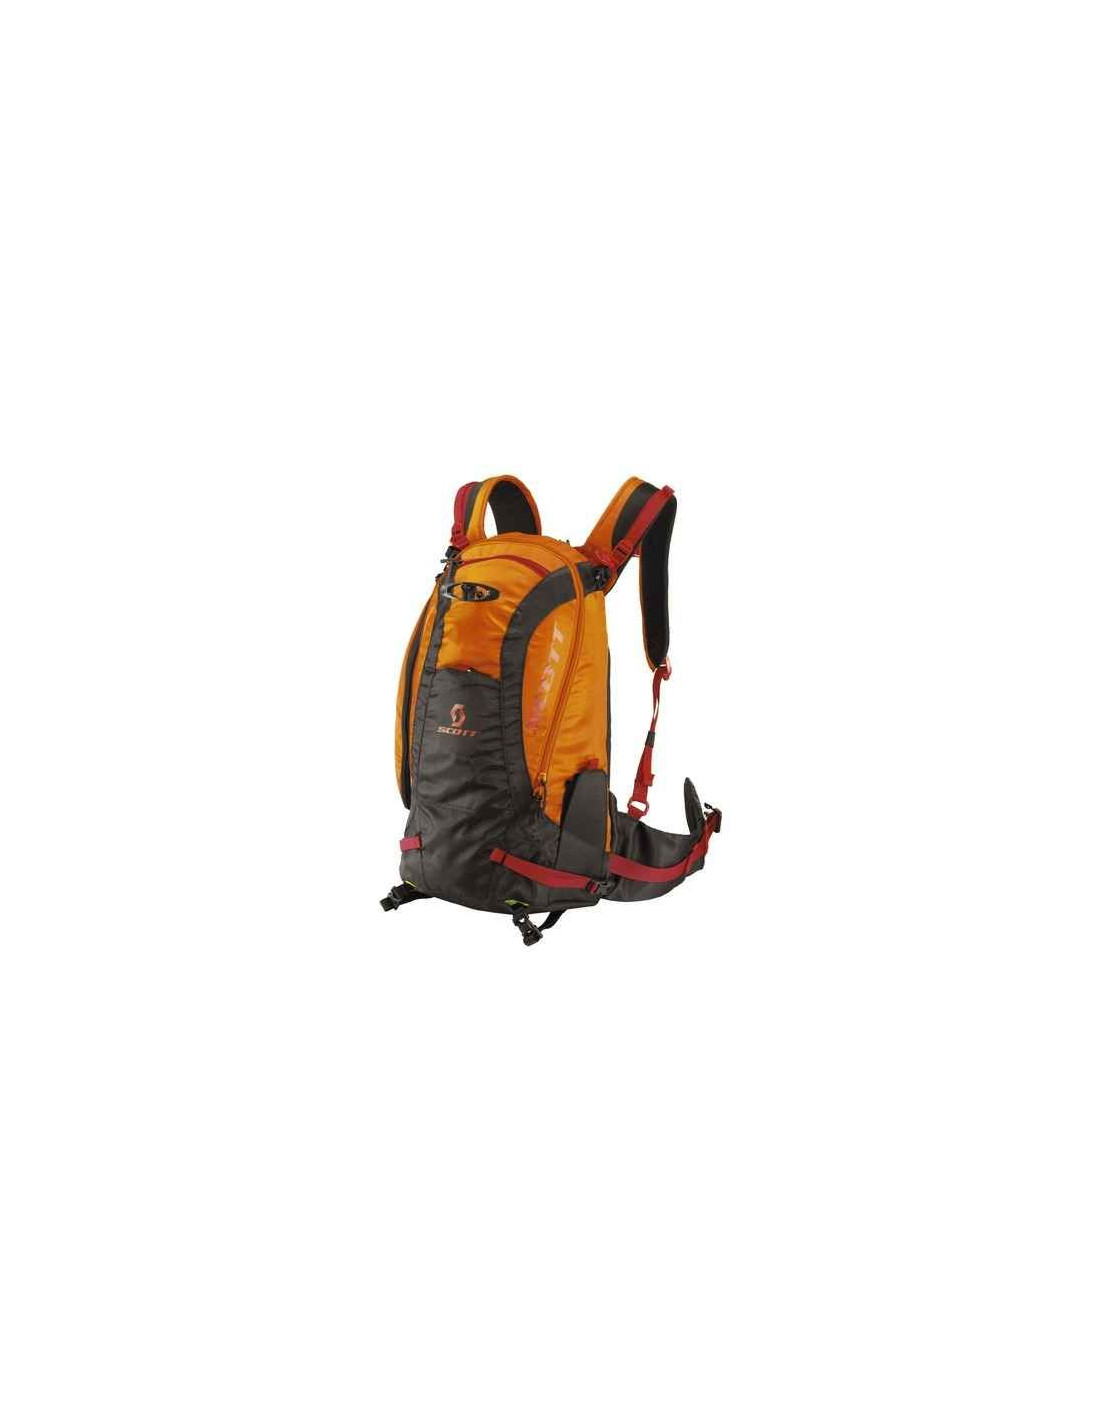 GRAFTER PROTECT 16 BACKPACK